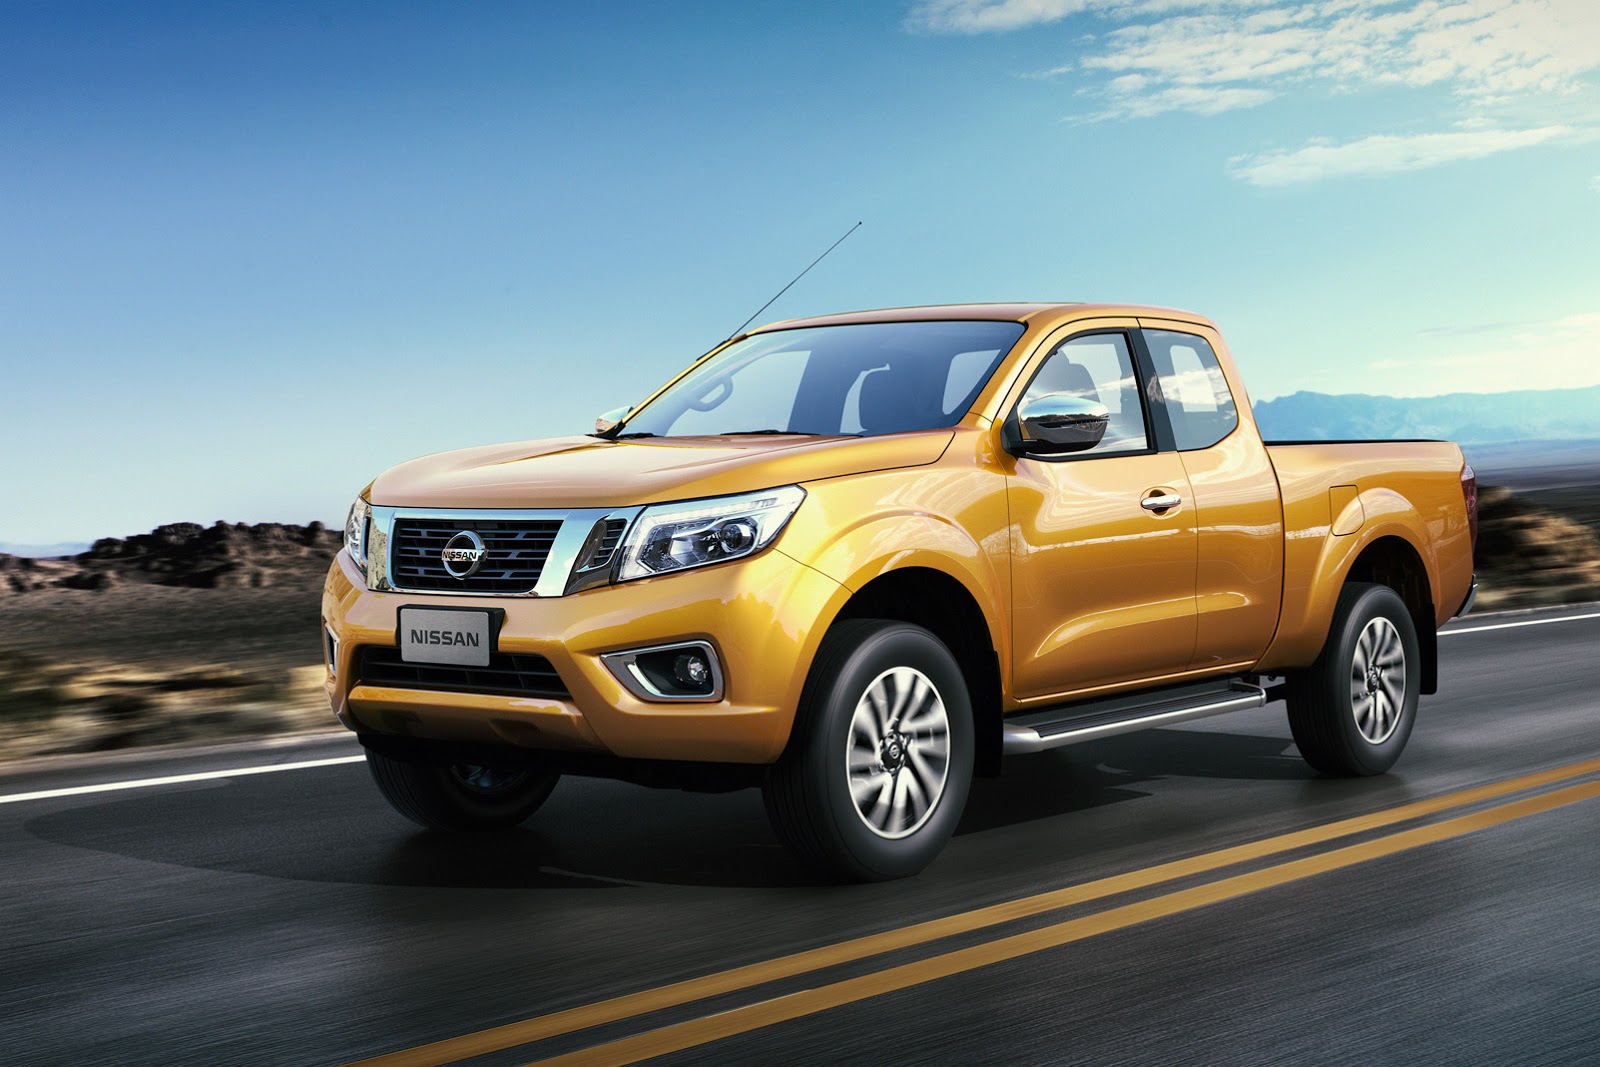 Renault Pickup Truck Confirmed for 2016, Will Be Based on Nissan Navara  autoevolution